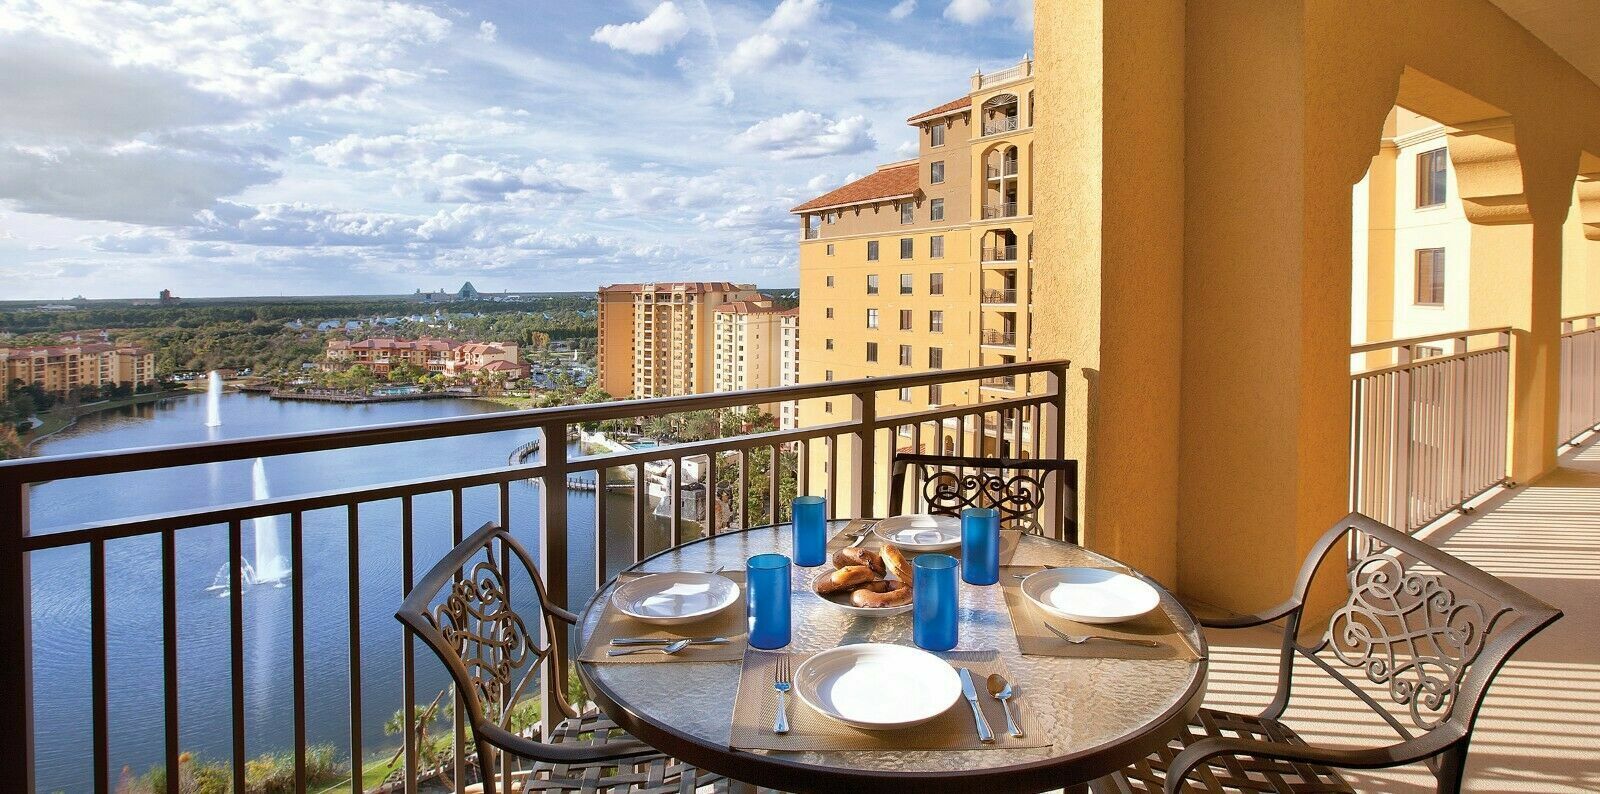 WYNDHAM Resorts incl. BONNET CREEK and other locations - as low as $125/night